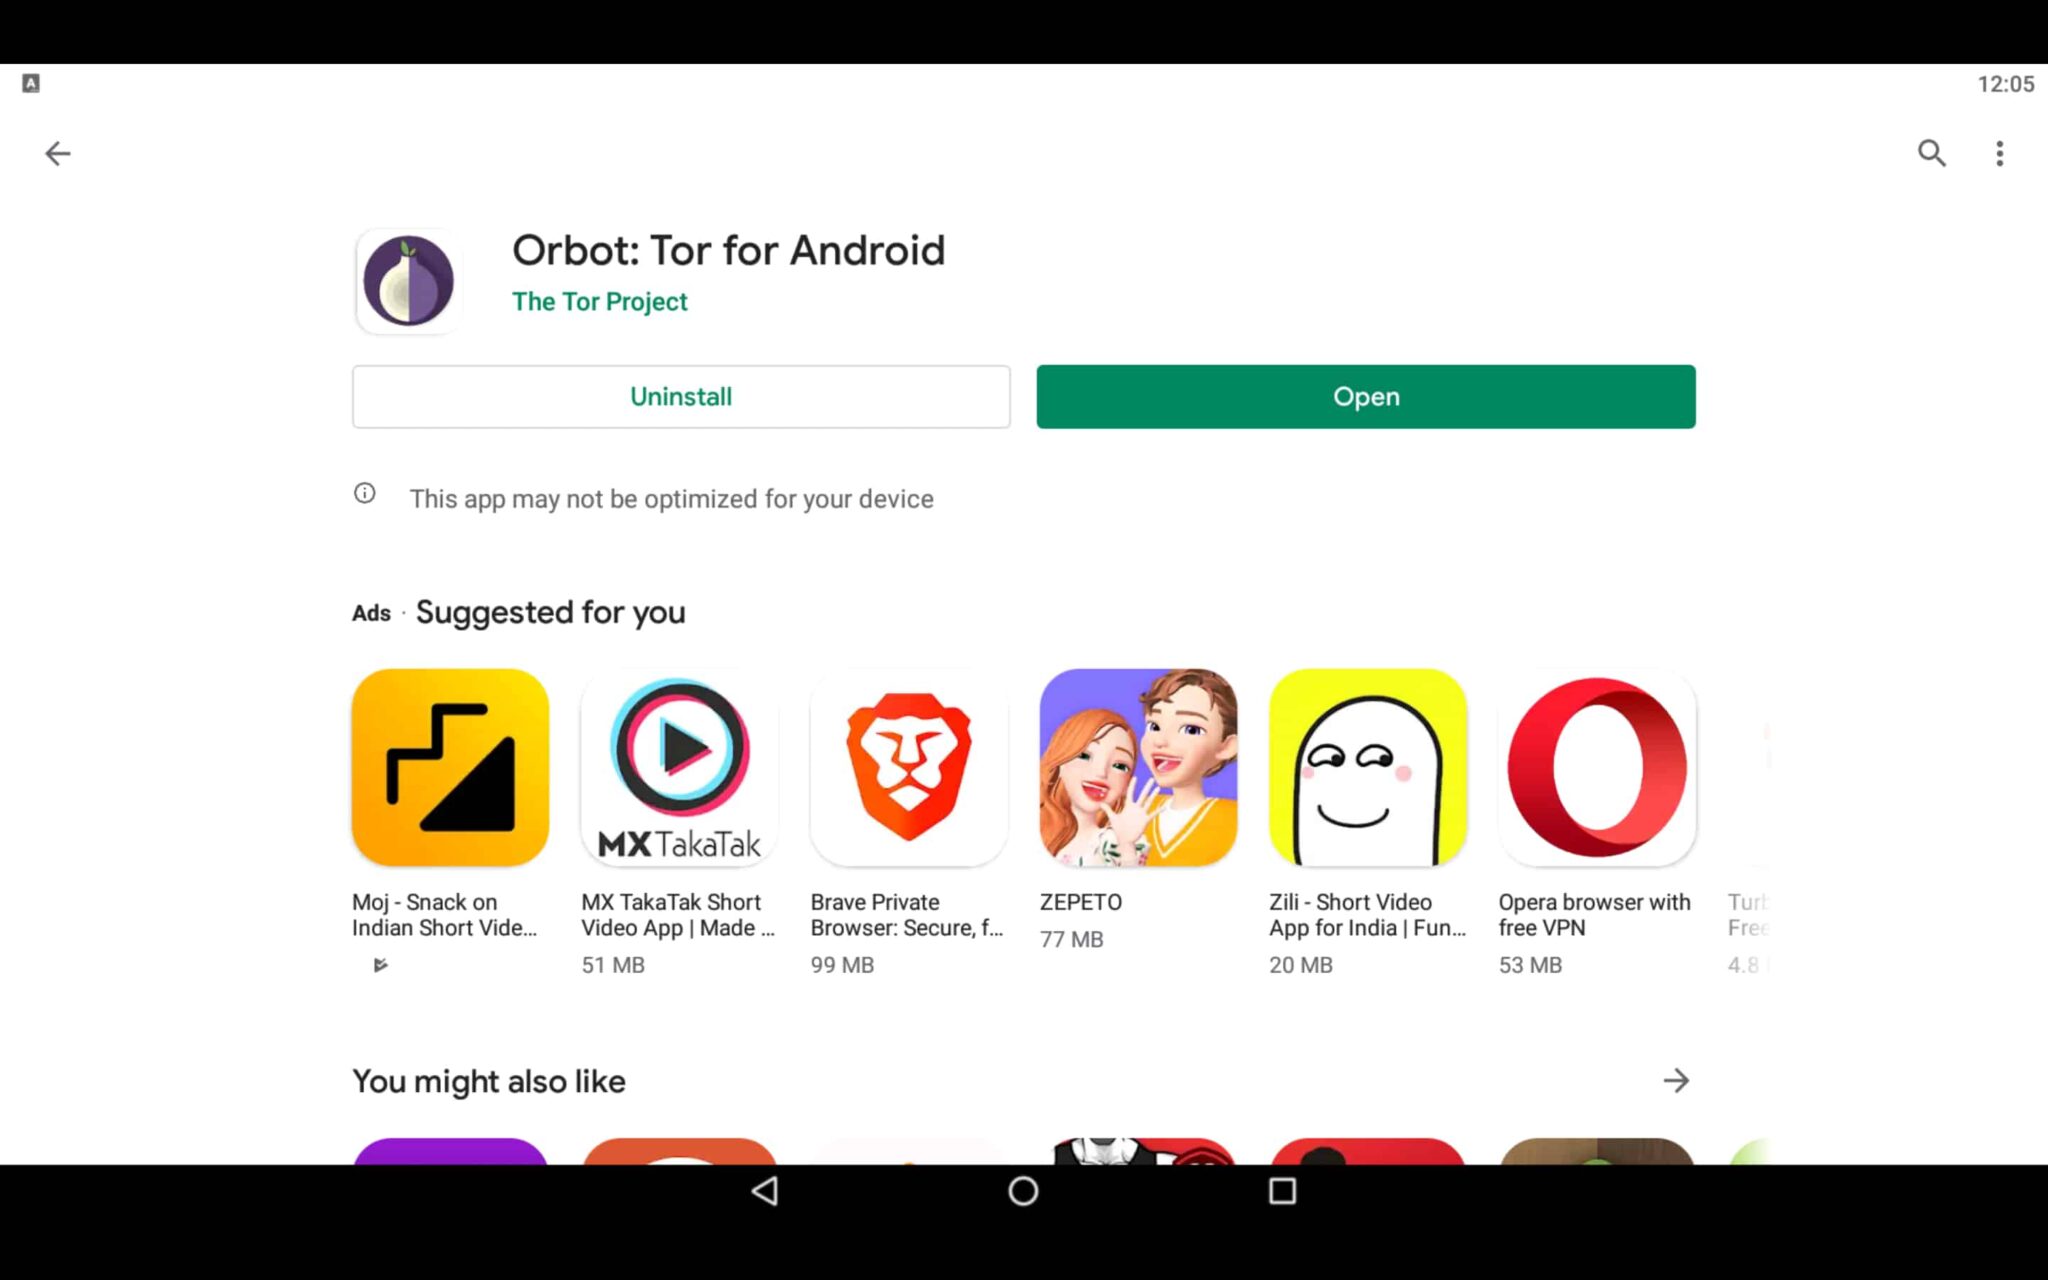 tor app browser play button